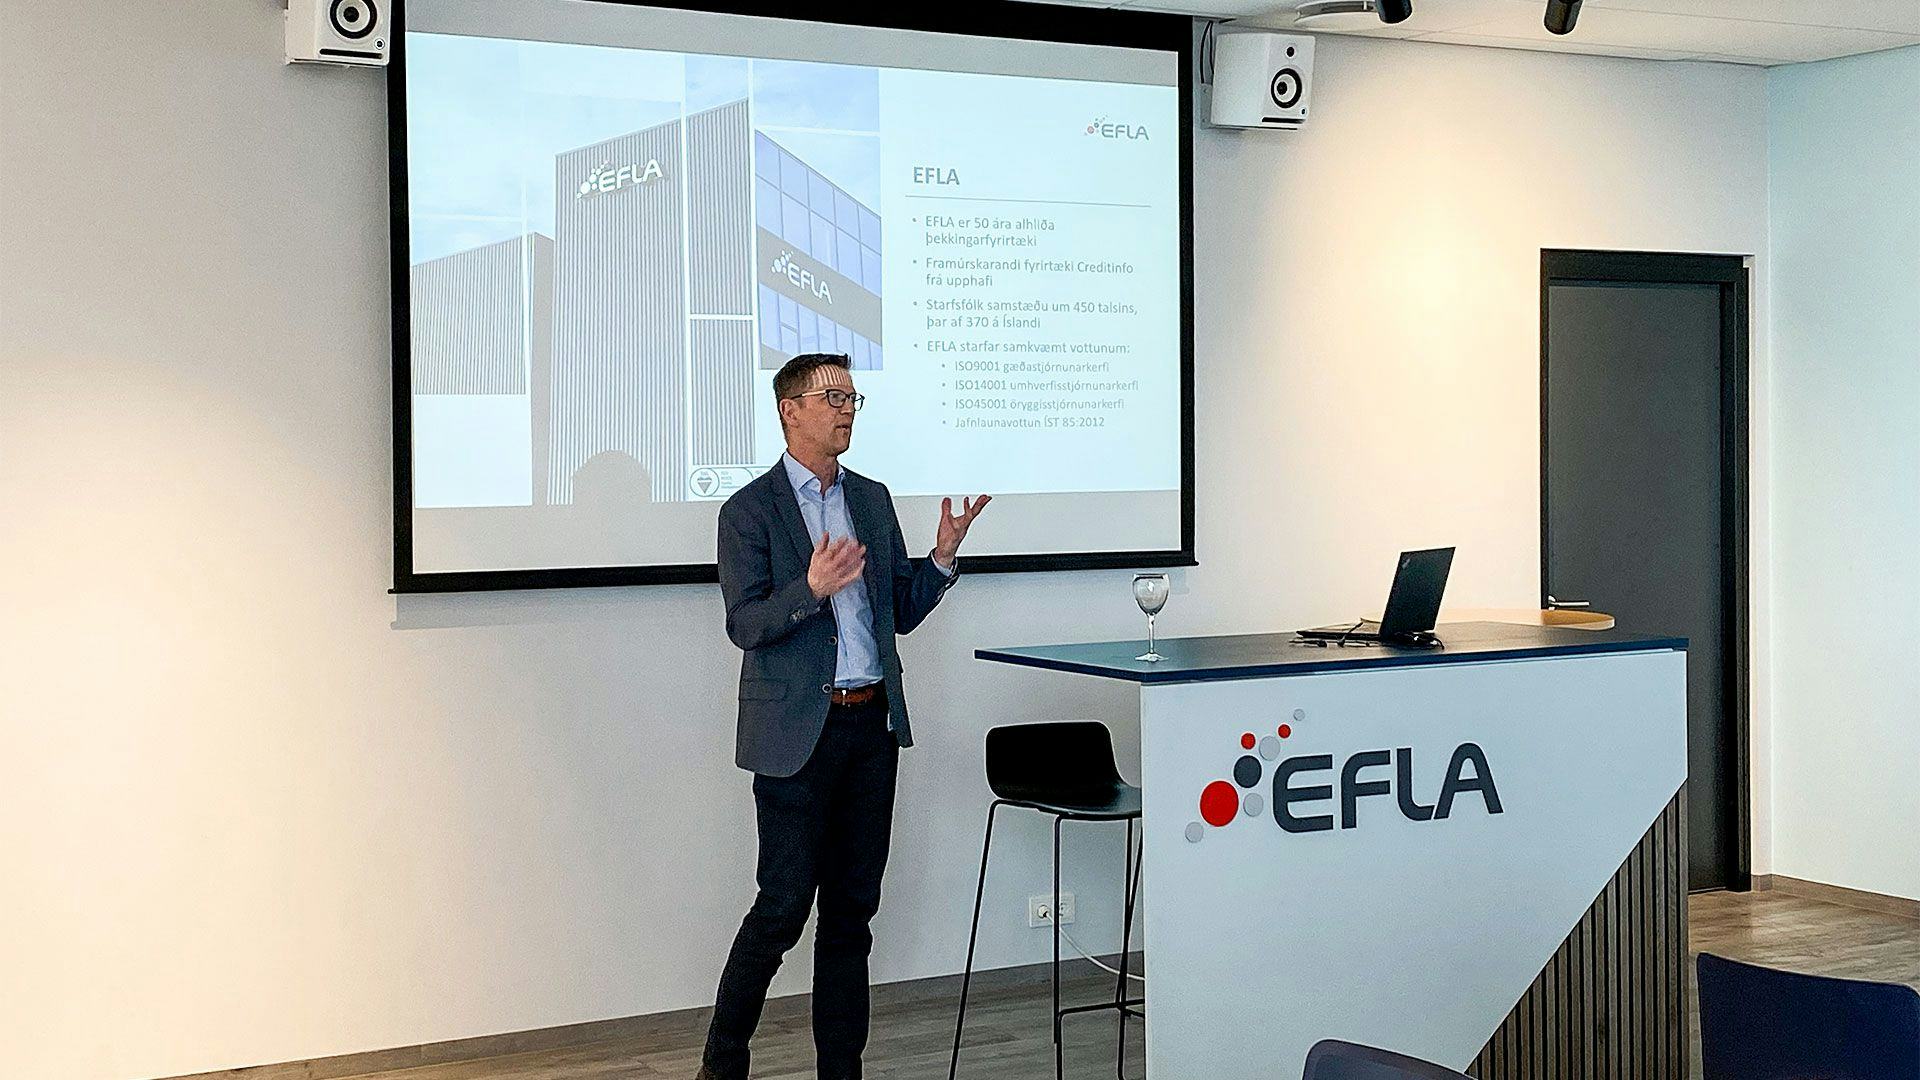 A man speaking at a podium labelled "EFLA" with a screen showing information about EFLA in the background